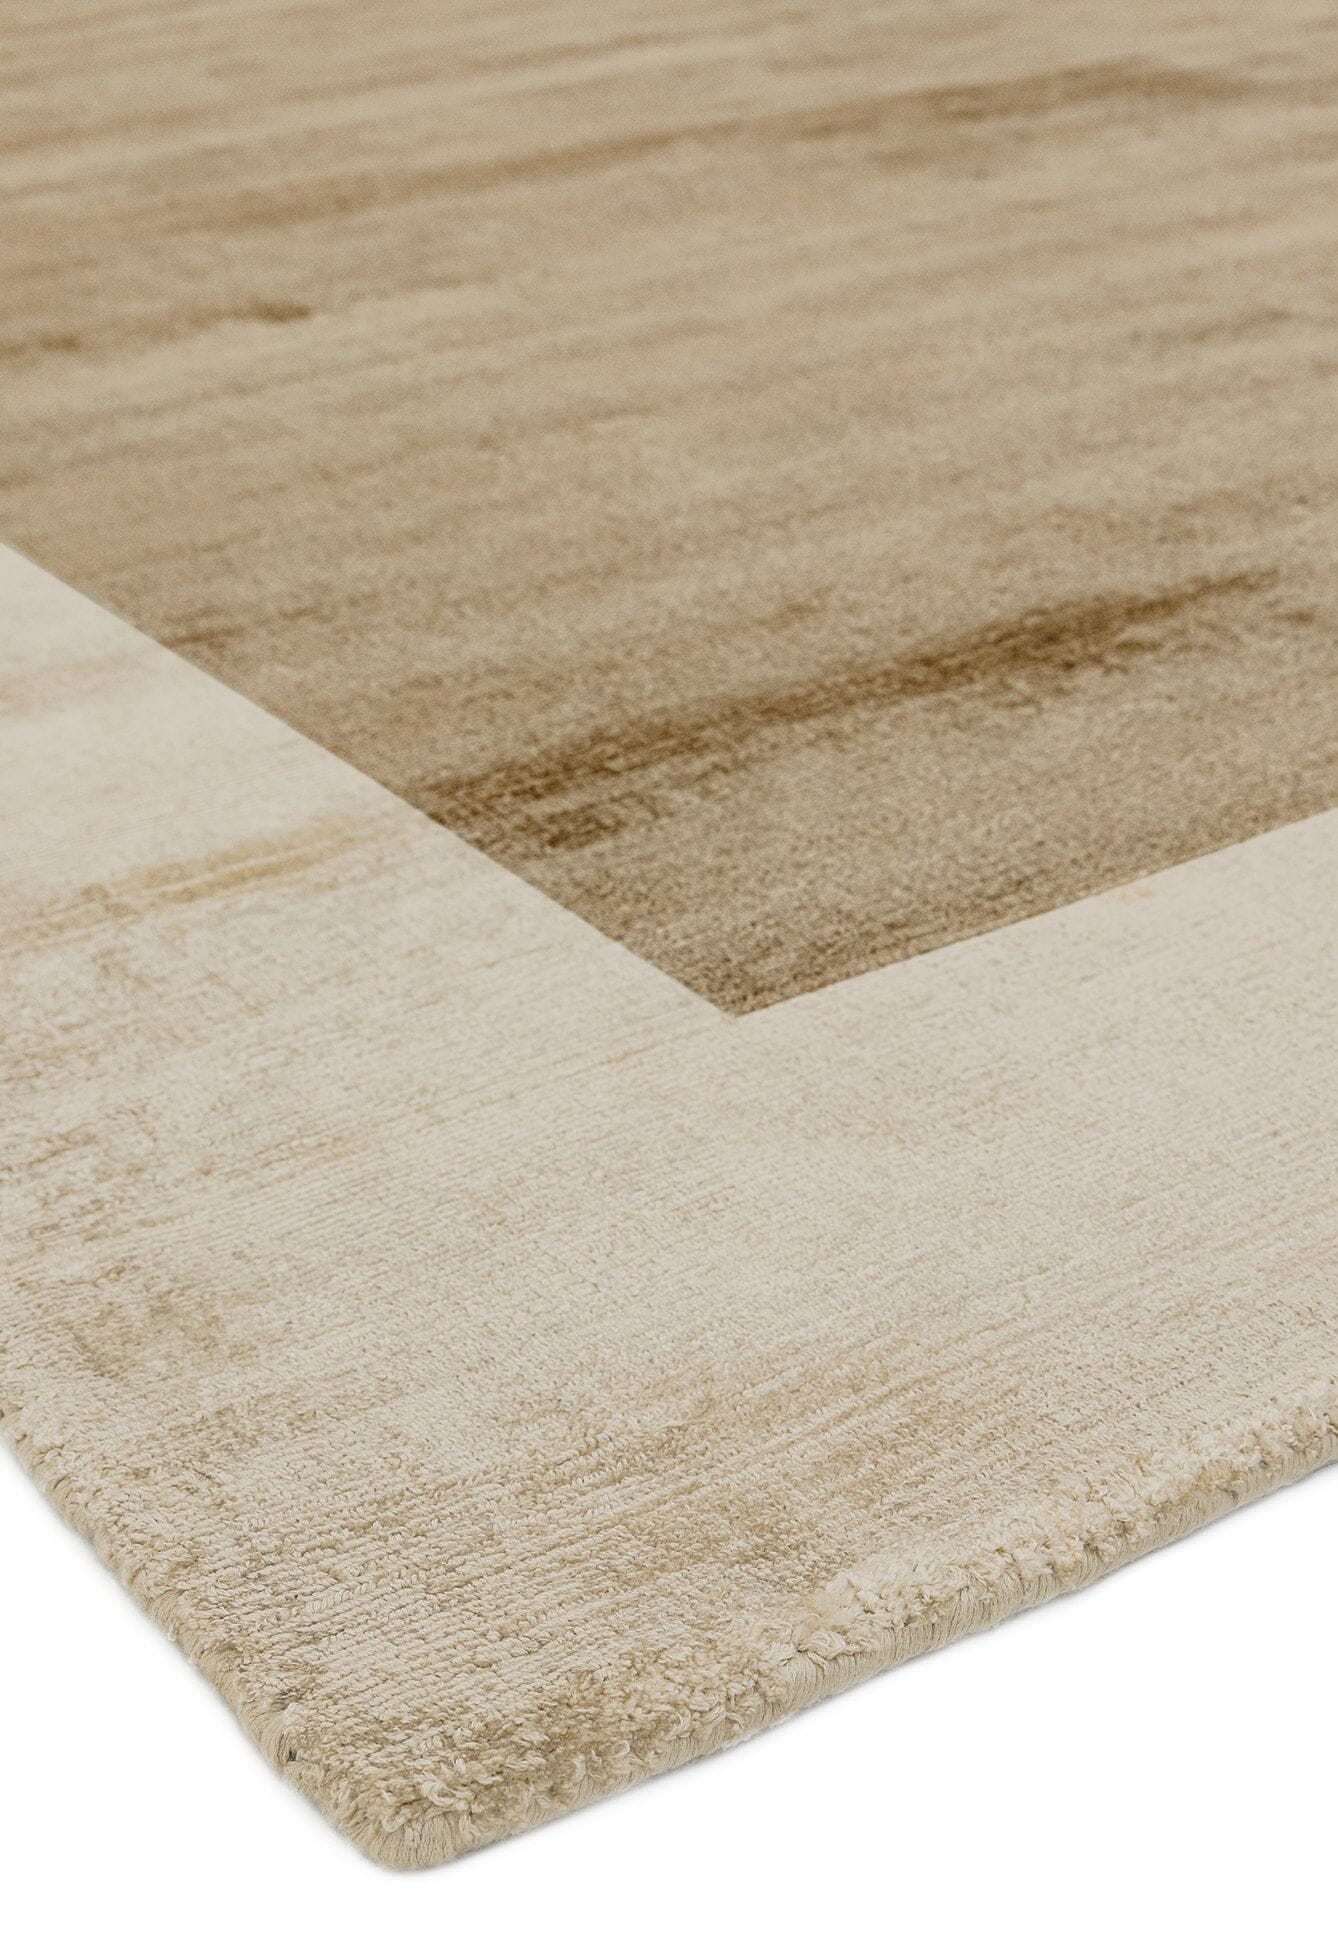  Asiatic Carpets-Asiatic Carpets Blade Hand Woven Rug Putty Champagne - 120 x 170cm-Beige, Natural 701 